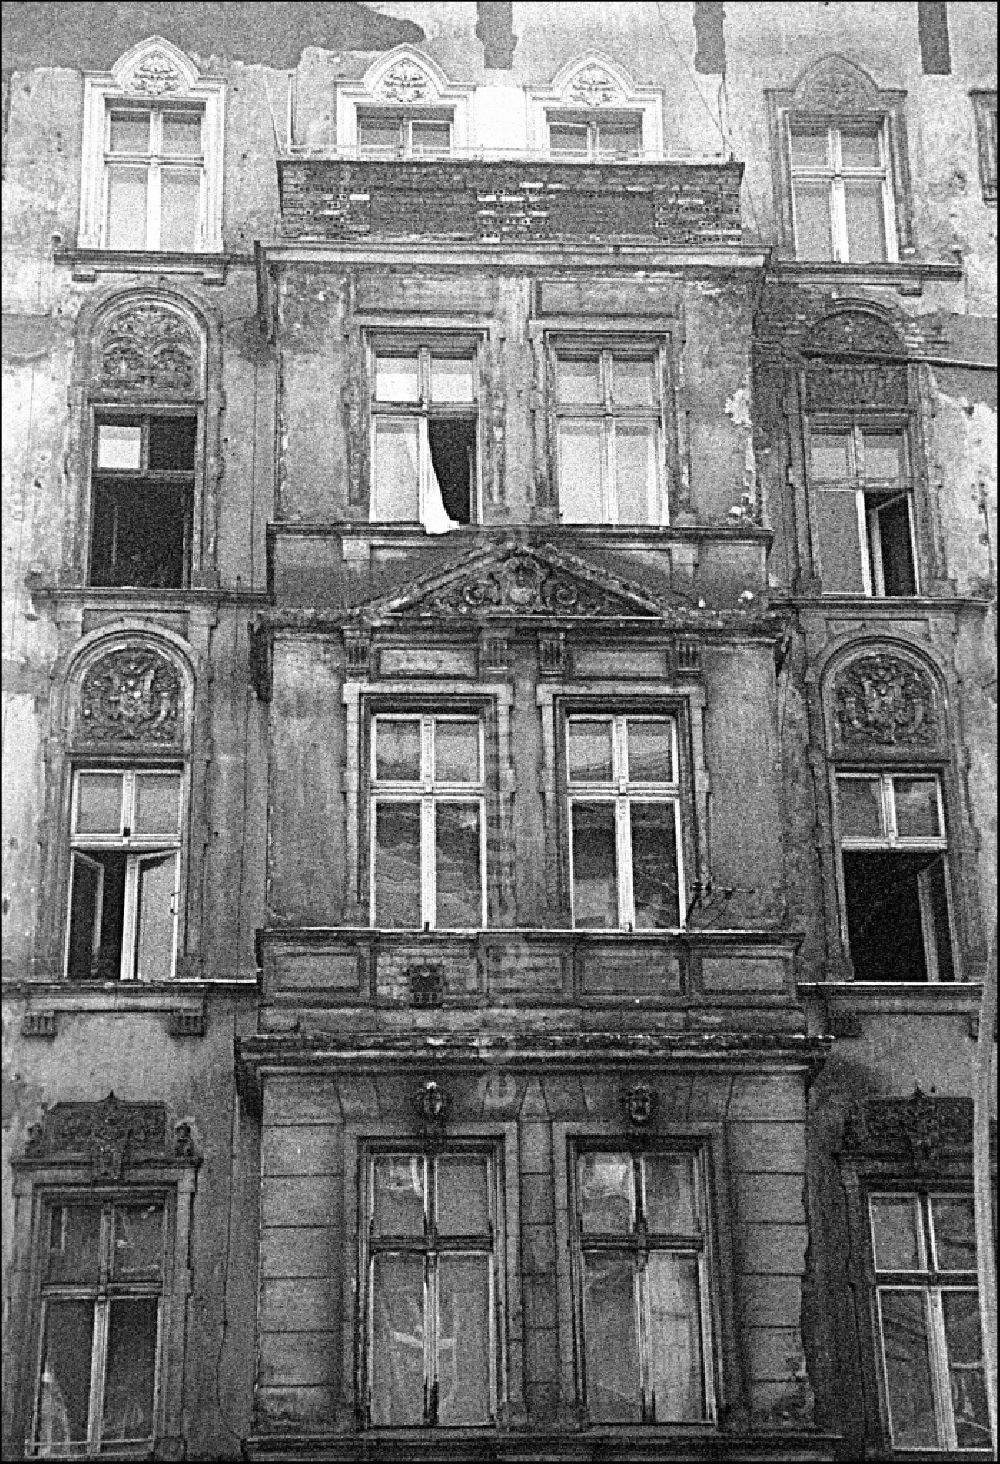 GDR image archive: Berlin - Facades and gables in Mitte and Prenzlauer Berg in East Berlin on the territory of the former GDR, German Democratic Republic